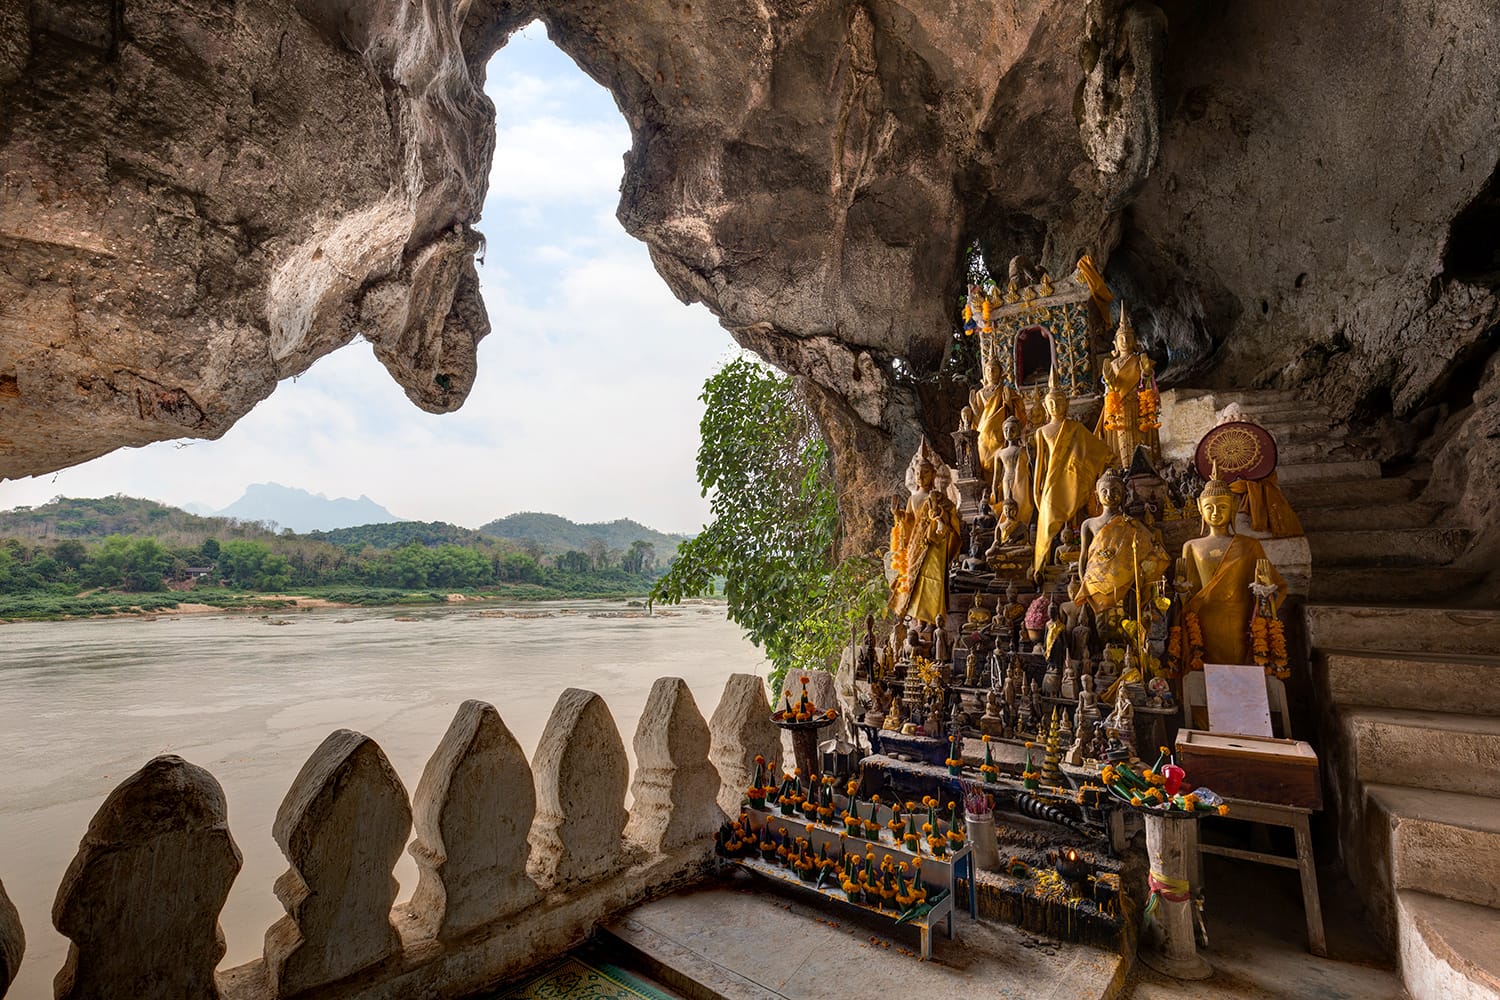 View of the Mekong River and many golden and wooden Buddha statues and religious offerings inside the Tham Ting Cave at the famous Pak Ou Caves near Luang Prabang in Laos.